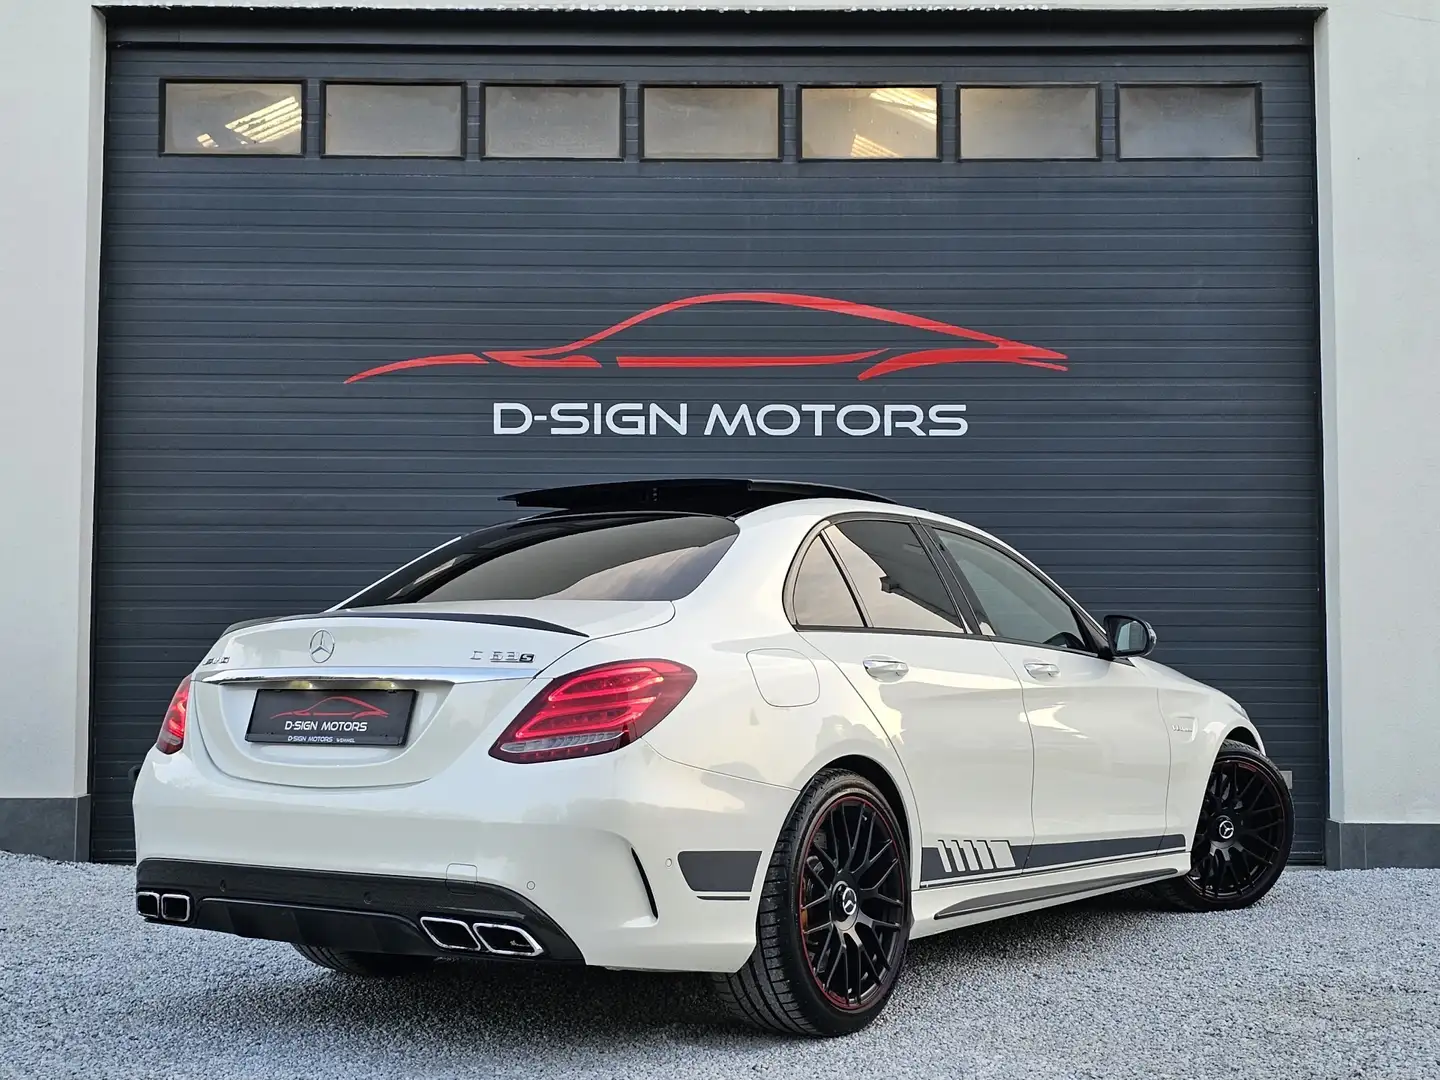 Mercedes-Benz C 63 AMG S V8 (510ch) EDITION 1 2015 70.000km FULL OPTIONS Wit - 2